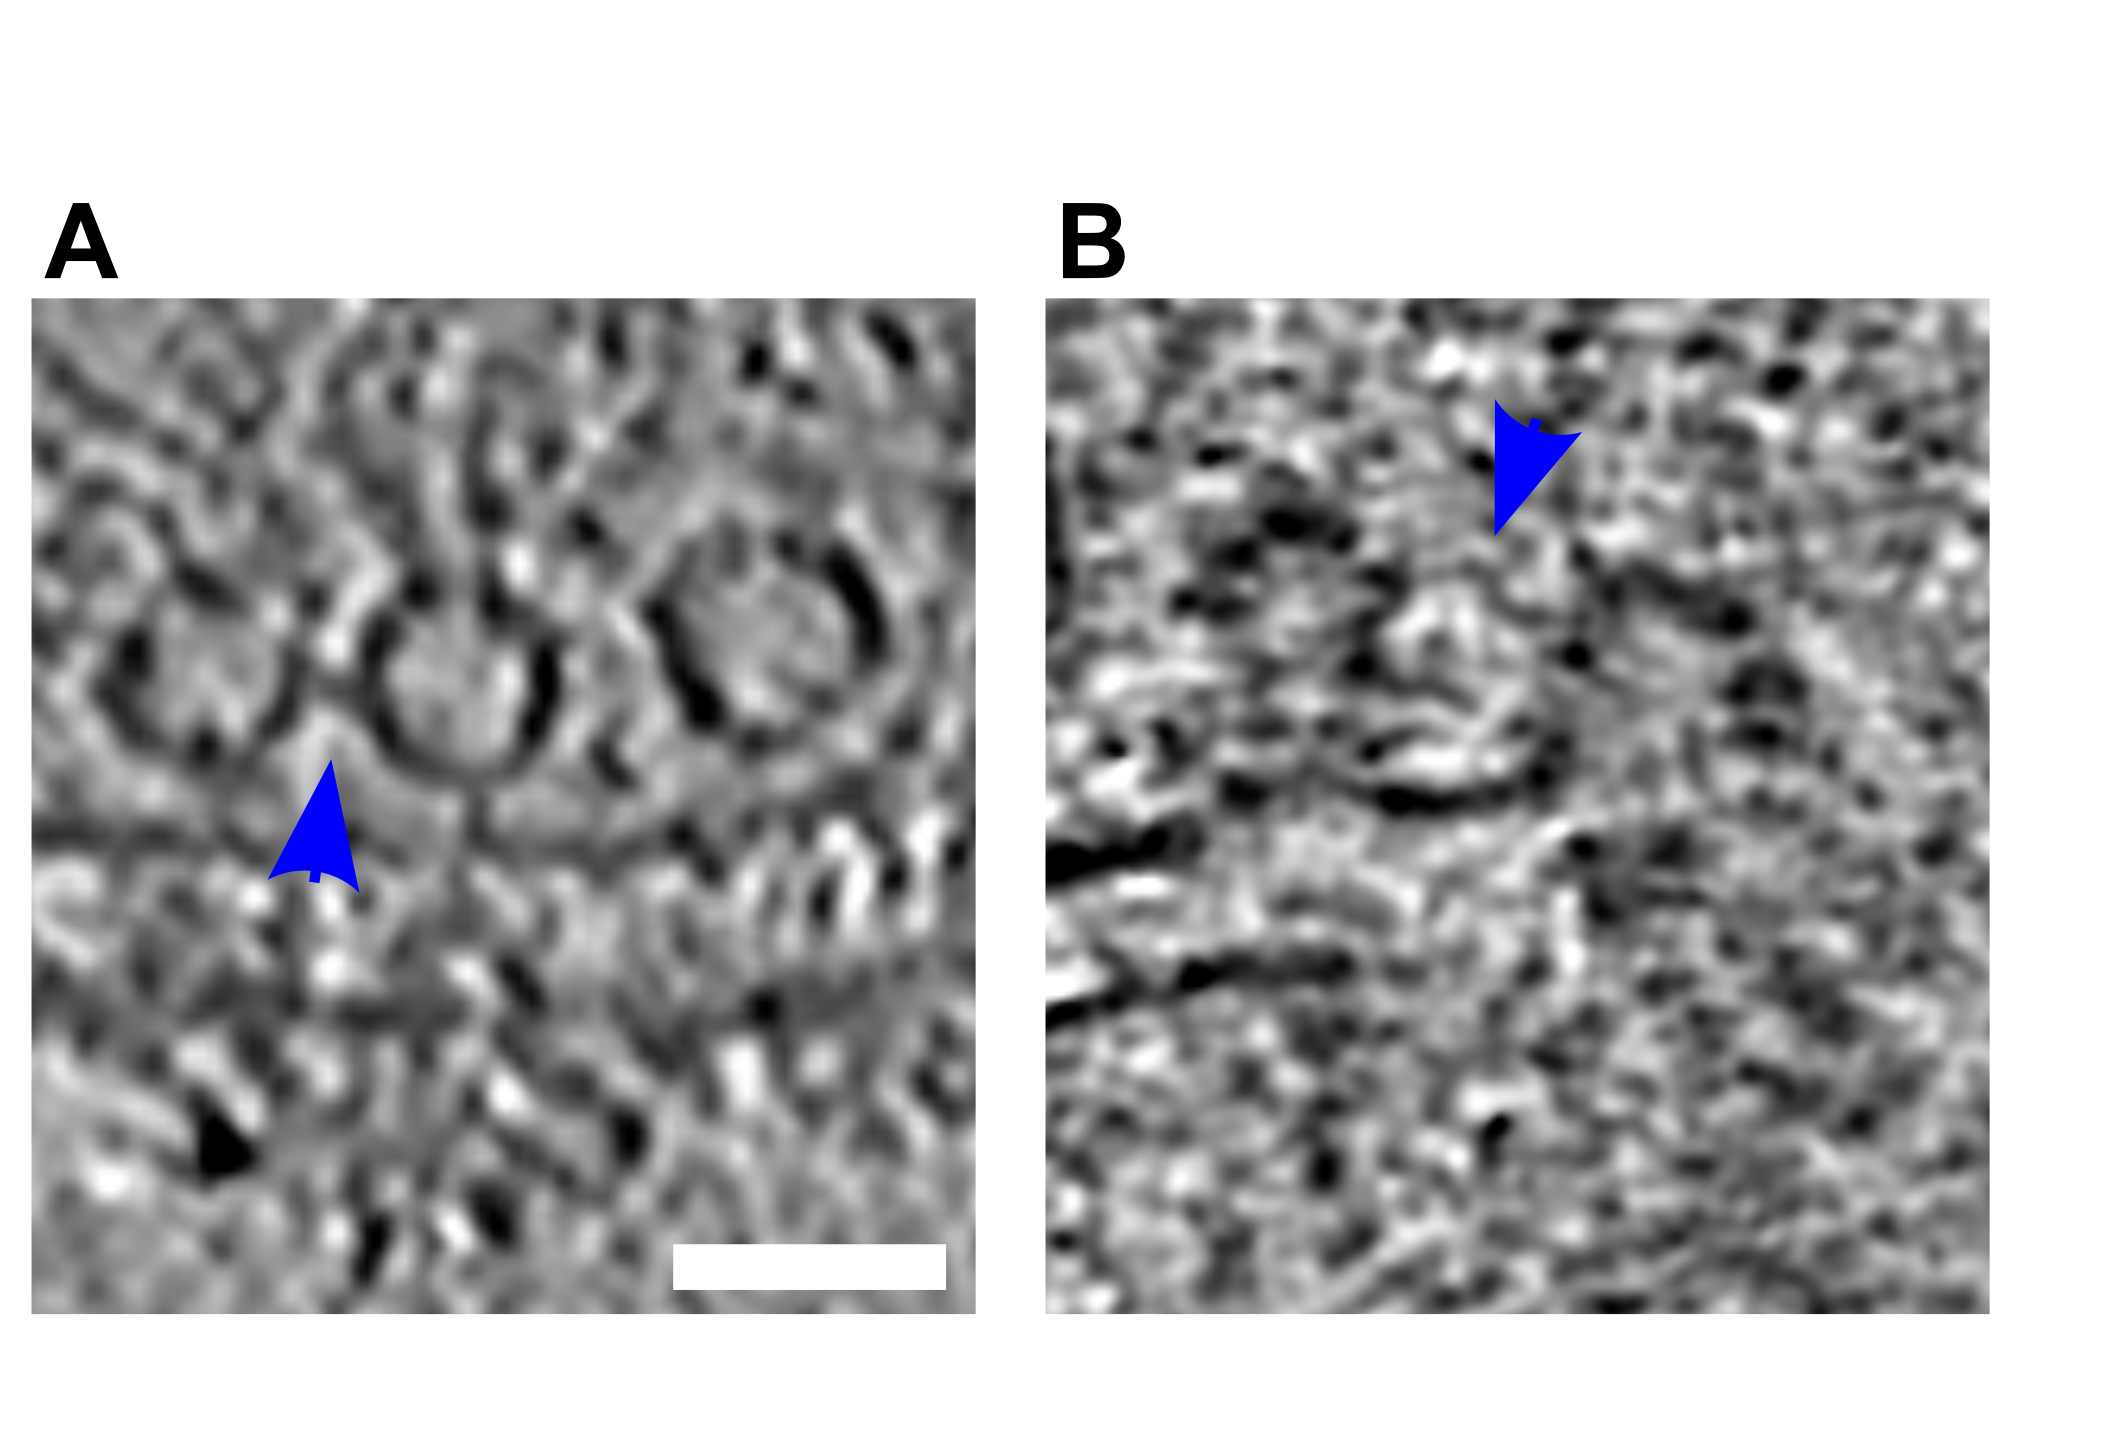 Figure S5: (A, B) Tomographic slices showing tethered connected vesicles. Blue arrows highlight the connectors. Scale bar, 50 nm.